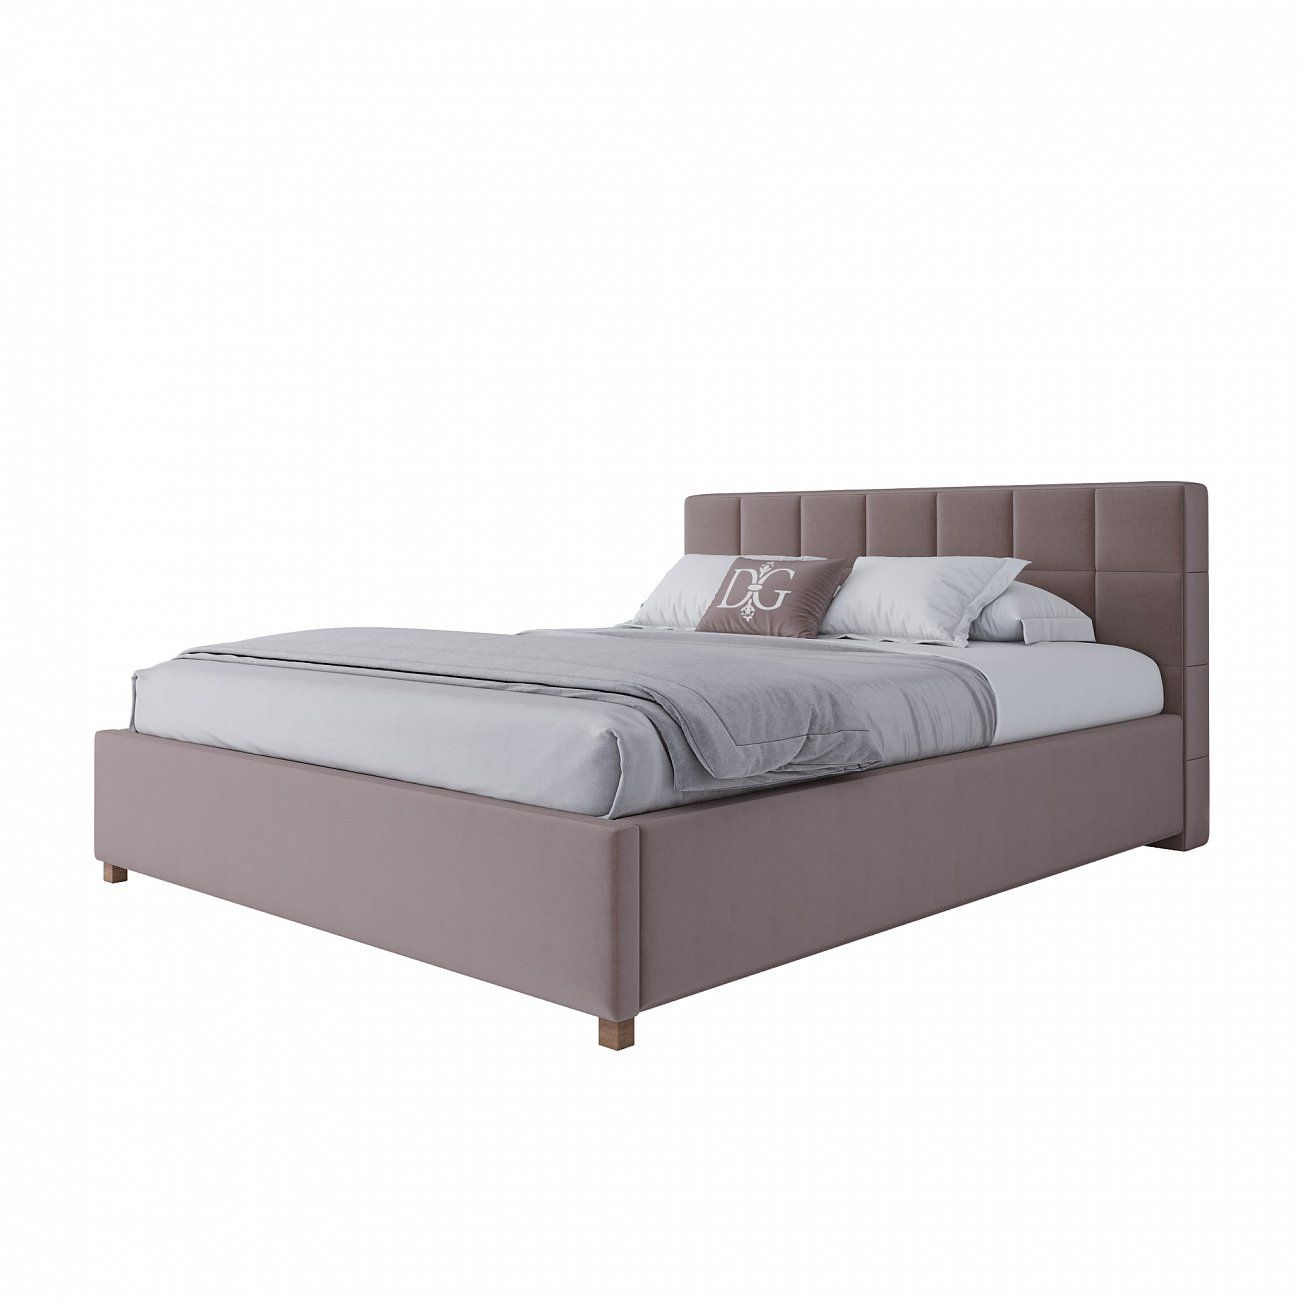 Double bed 160x200 cm grey-brown Wales